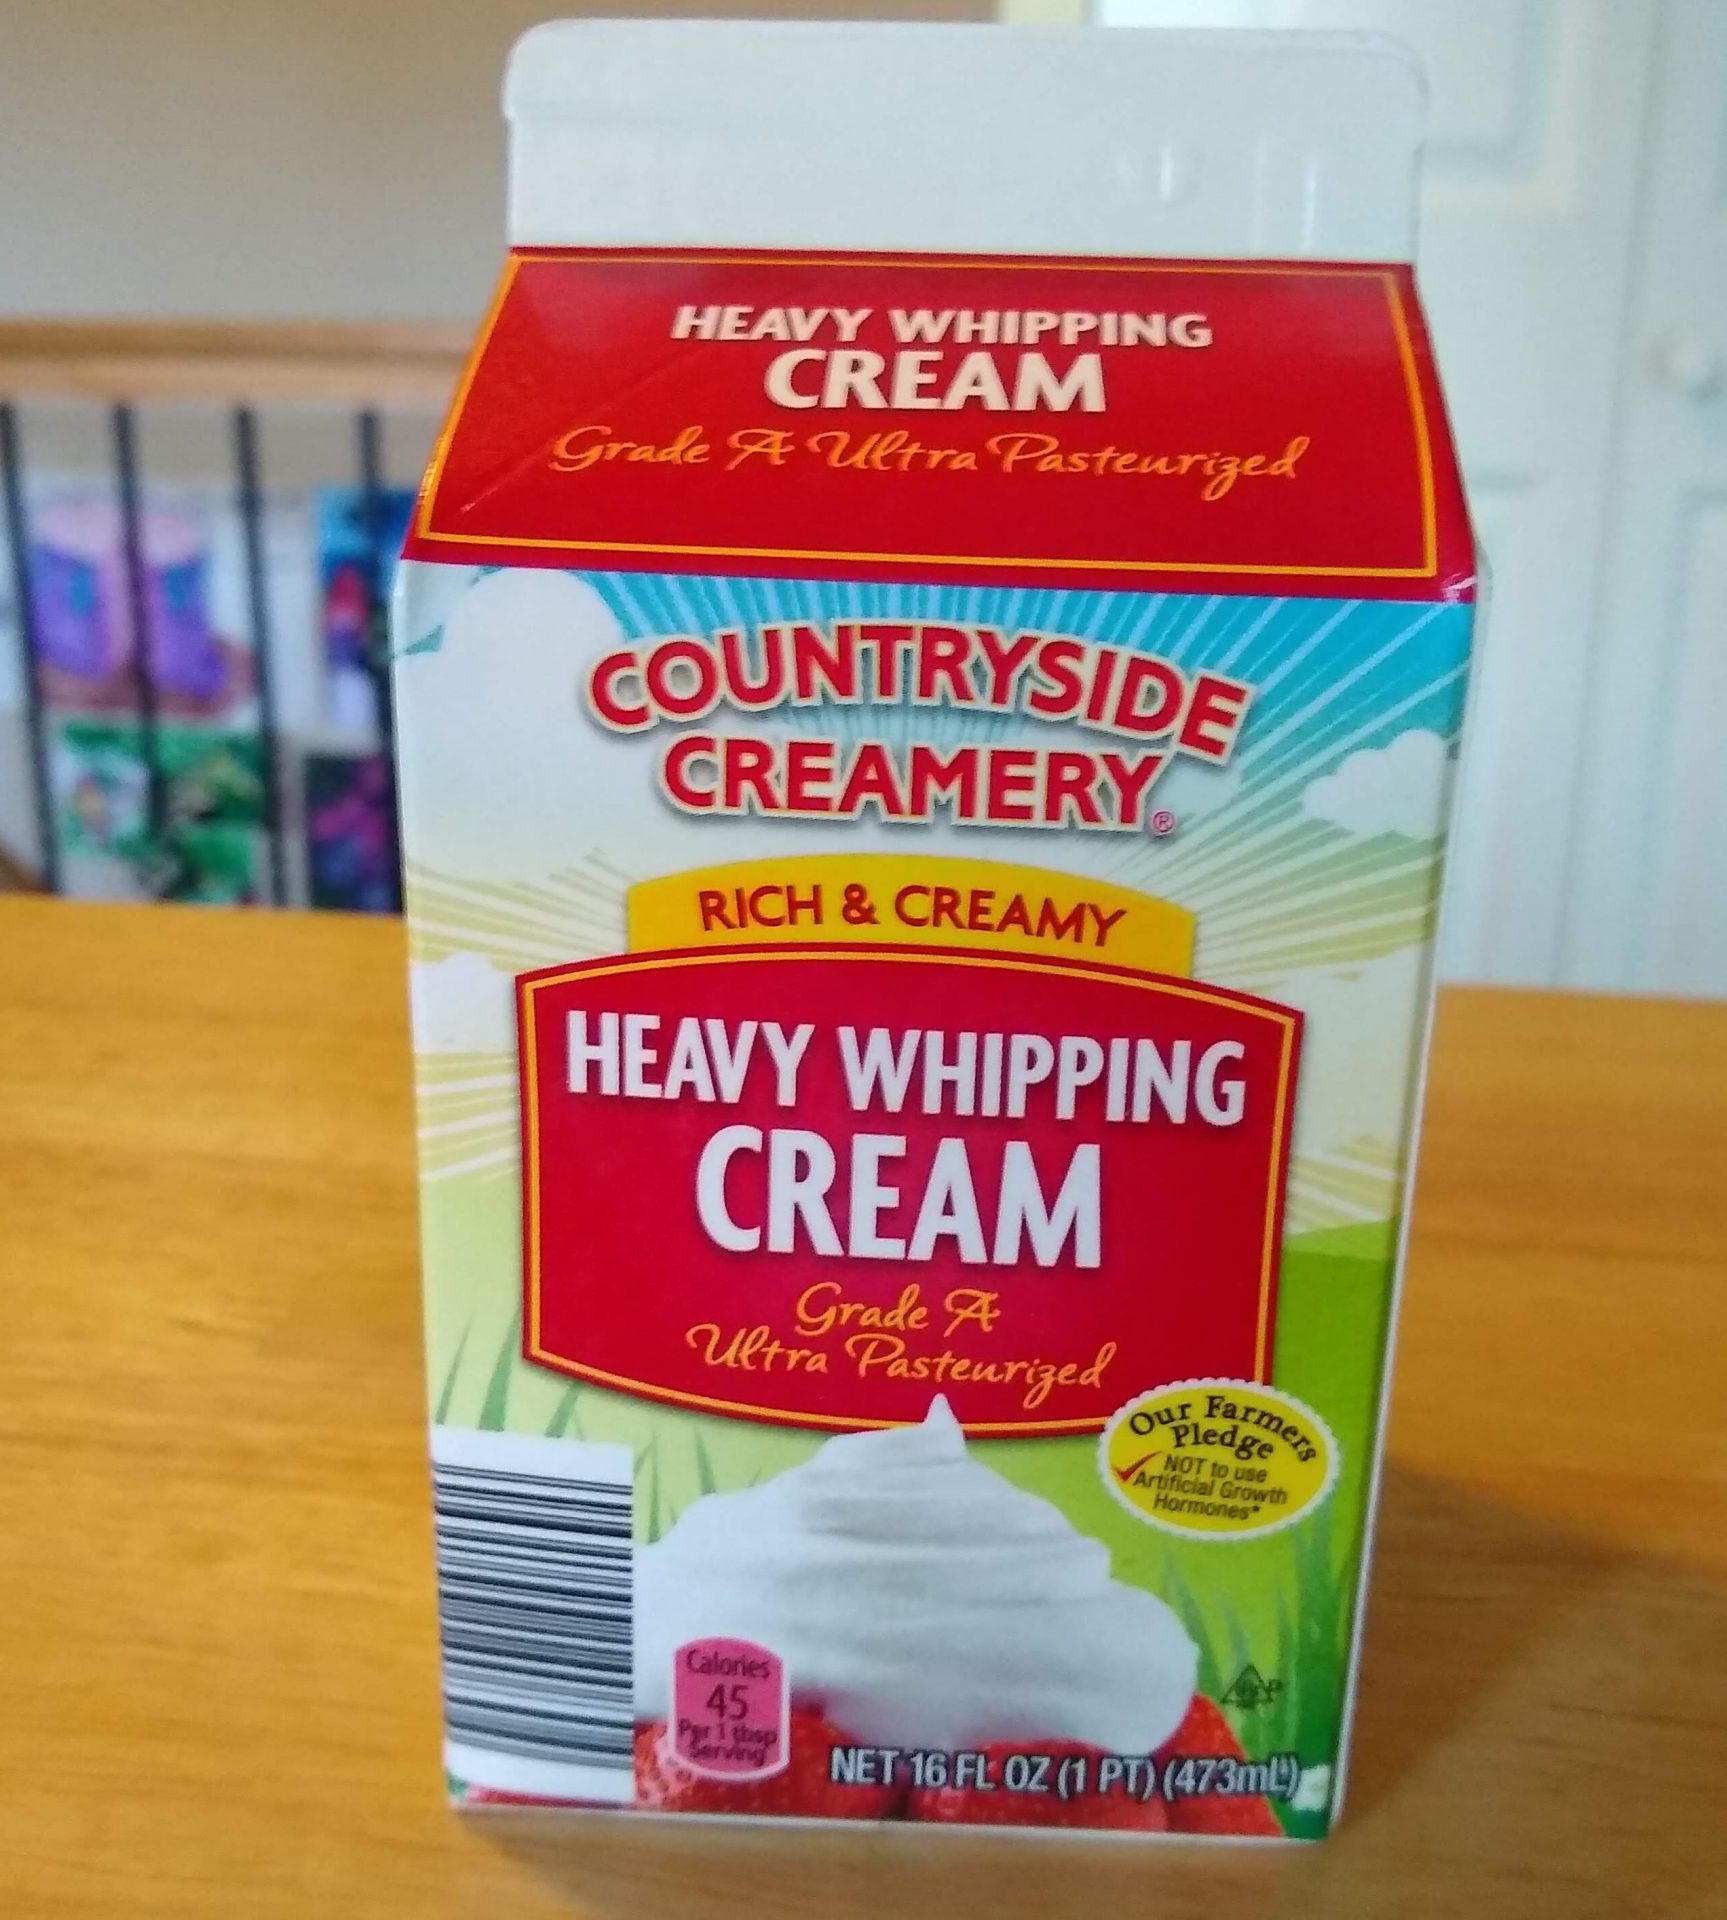 What to do with Leftover Heavy Whipping Cream